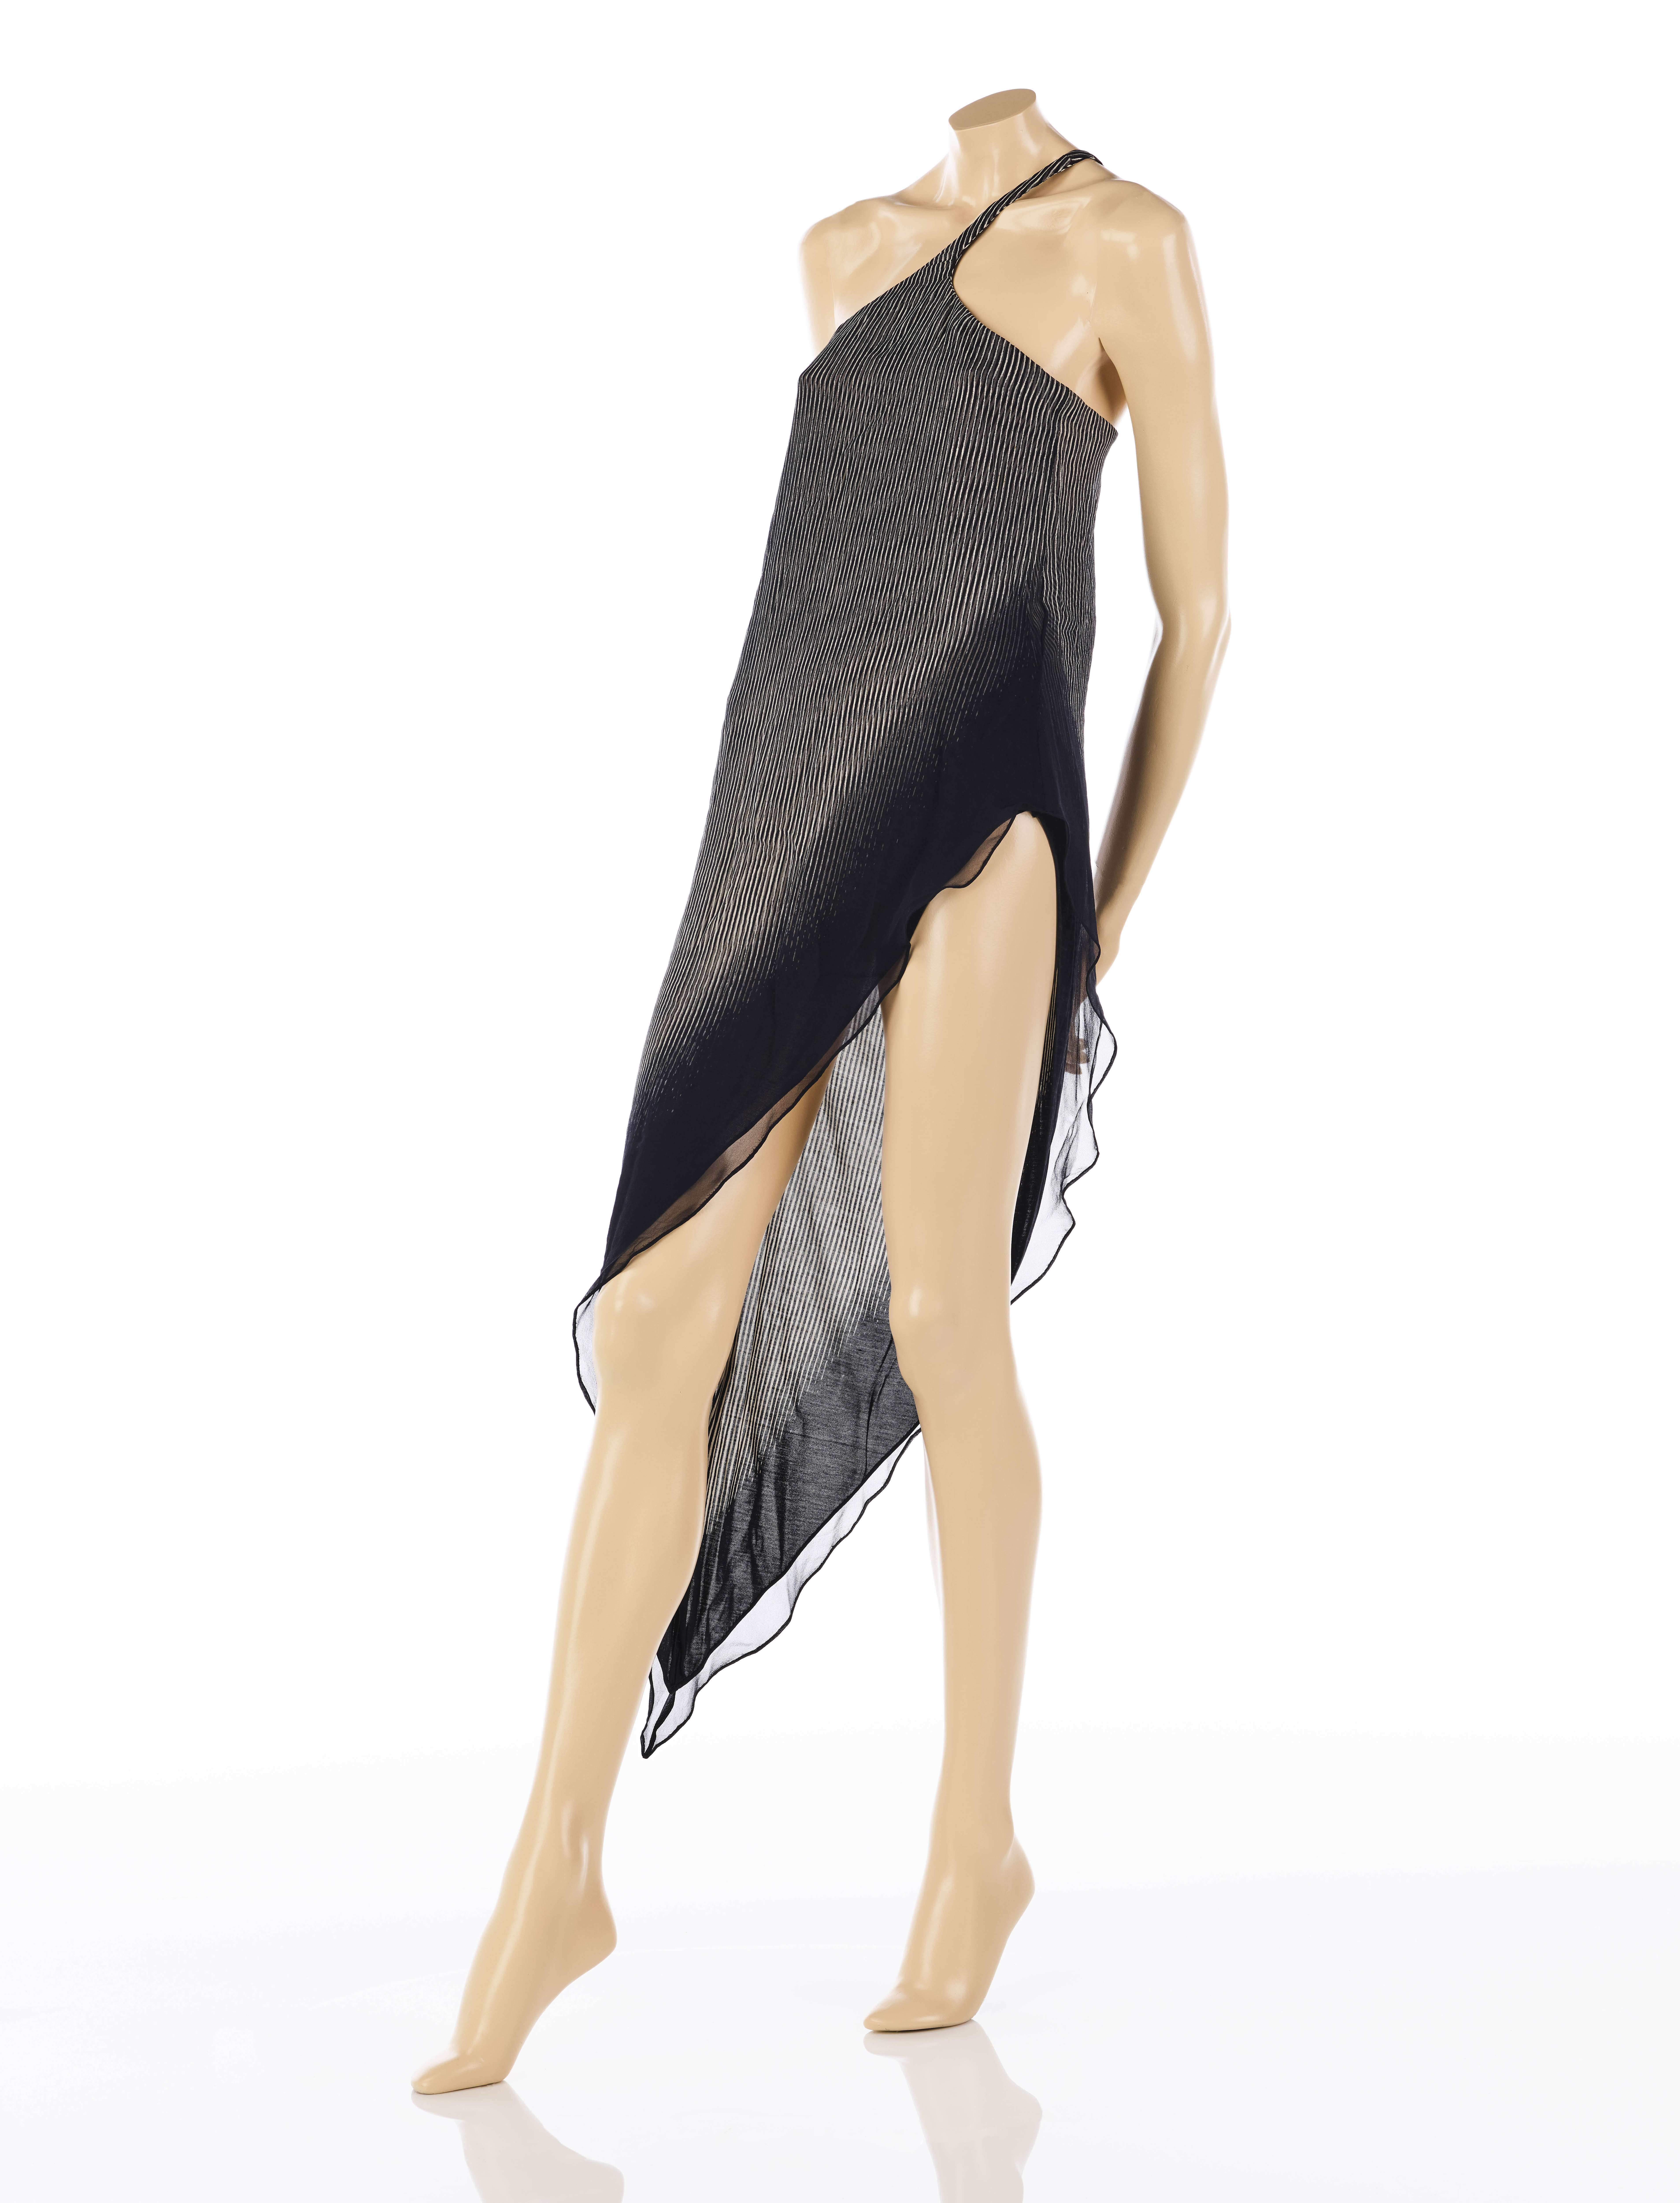 a picture of a black slit dress designed by stephen sprouse